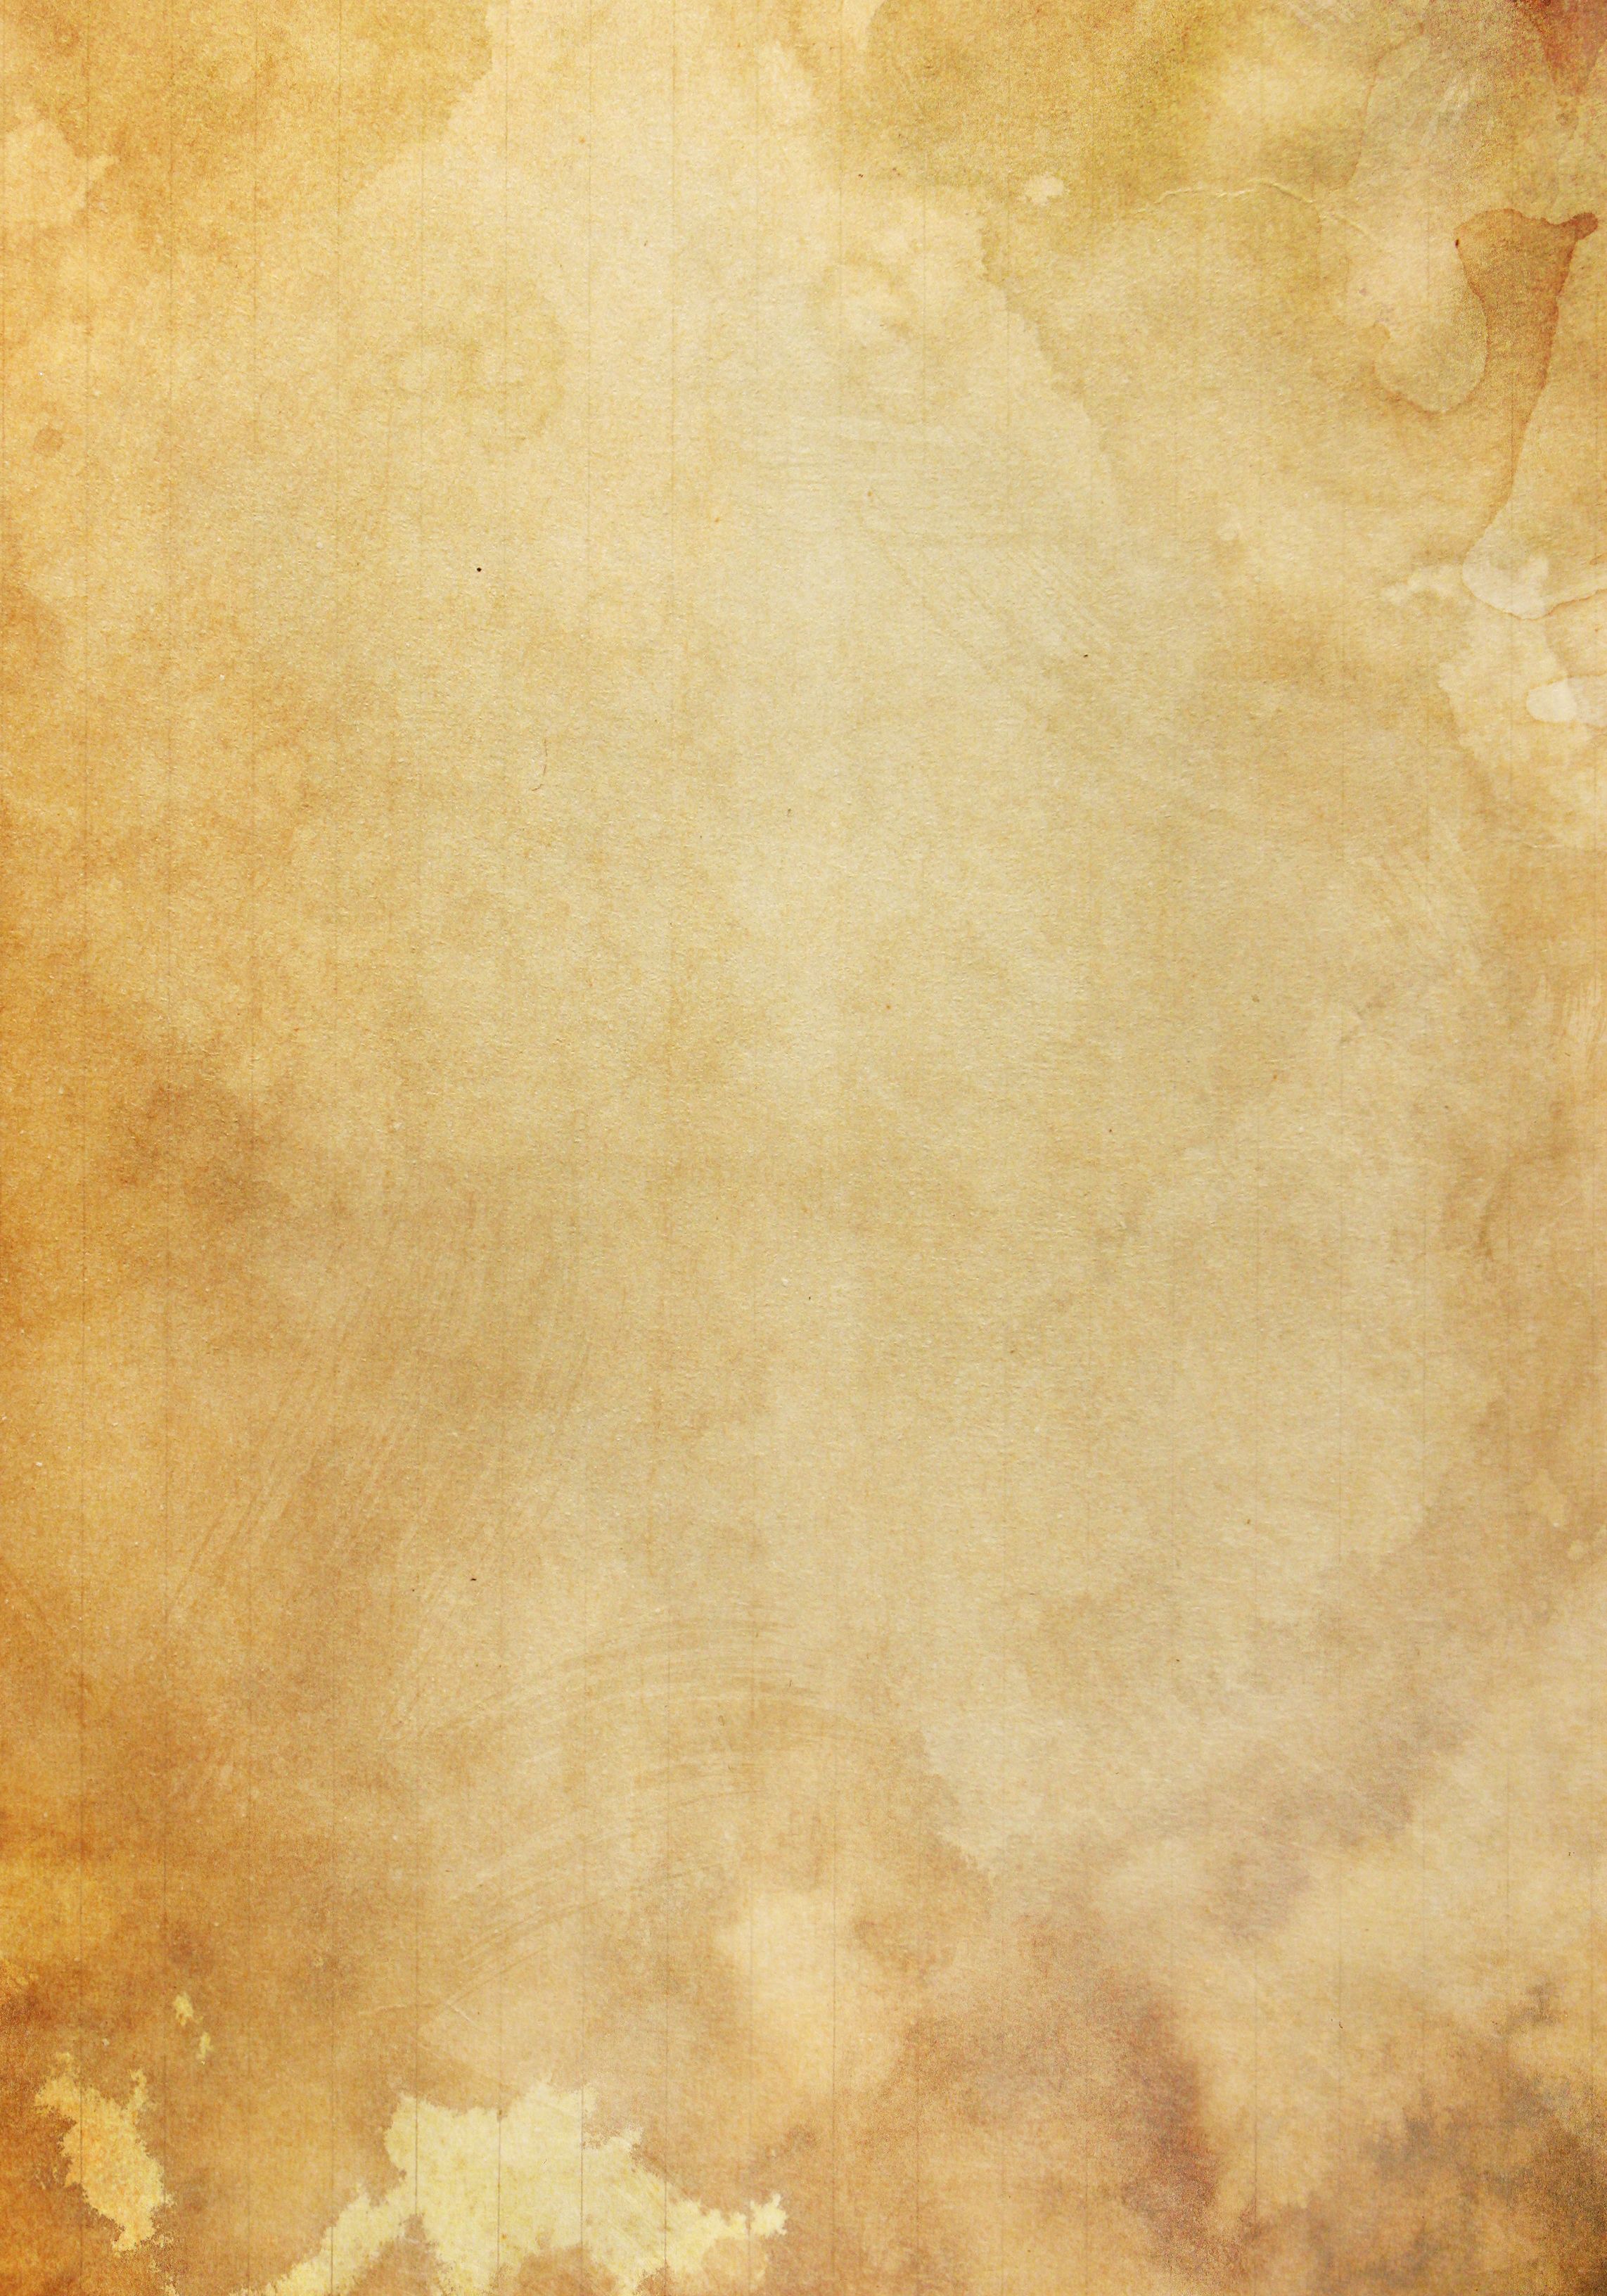 8 Re-Stained Paper Textures | Textures | Pinterest | Free paper ...